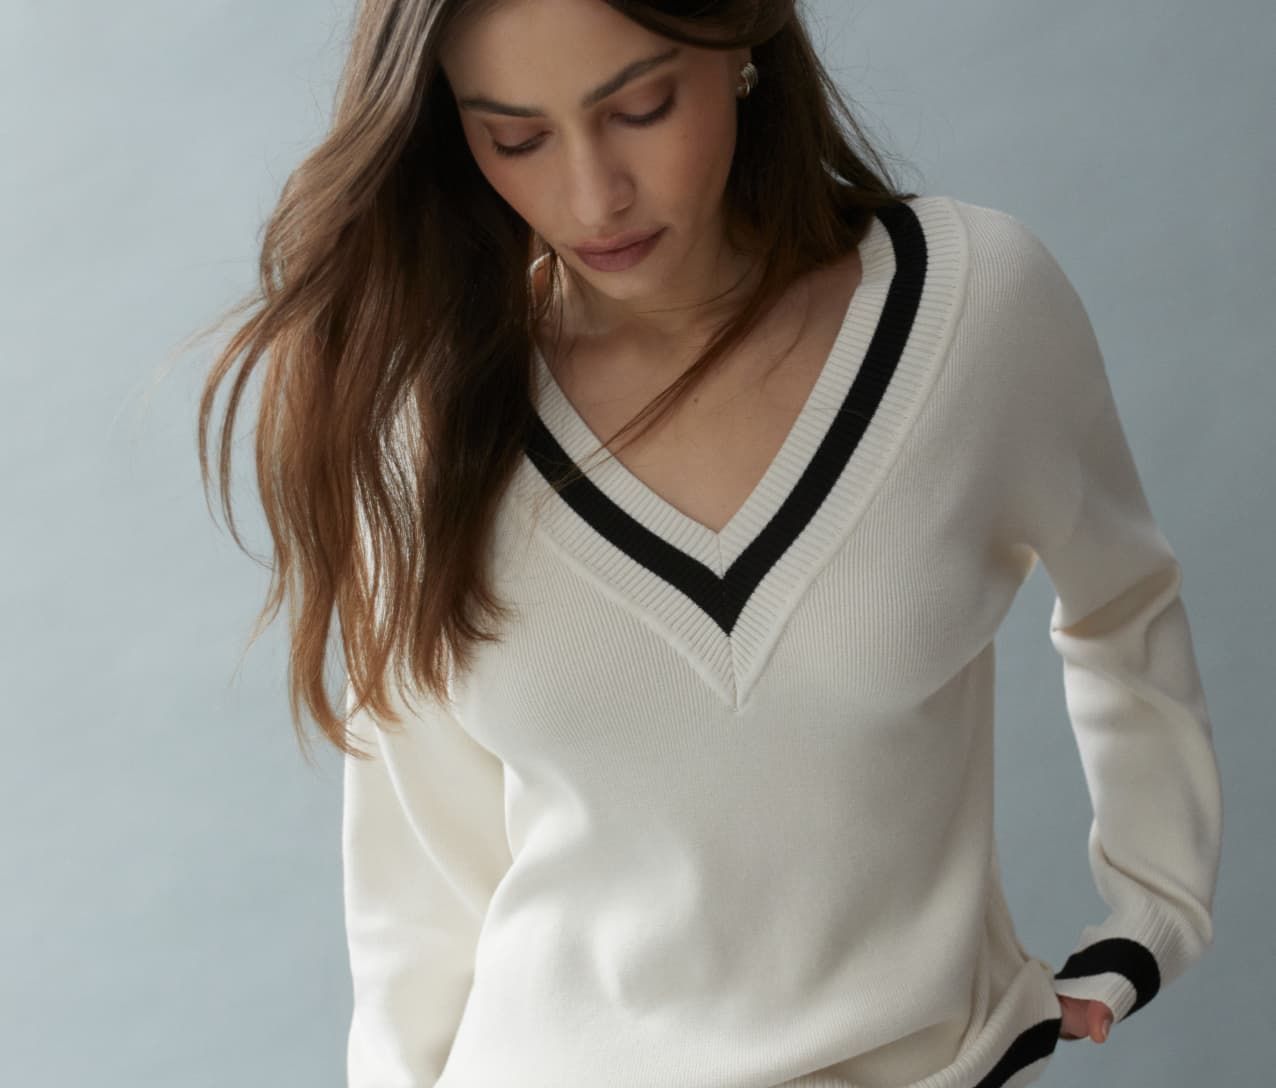 Model is wearing a white V-neck sweater and black pants.